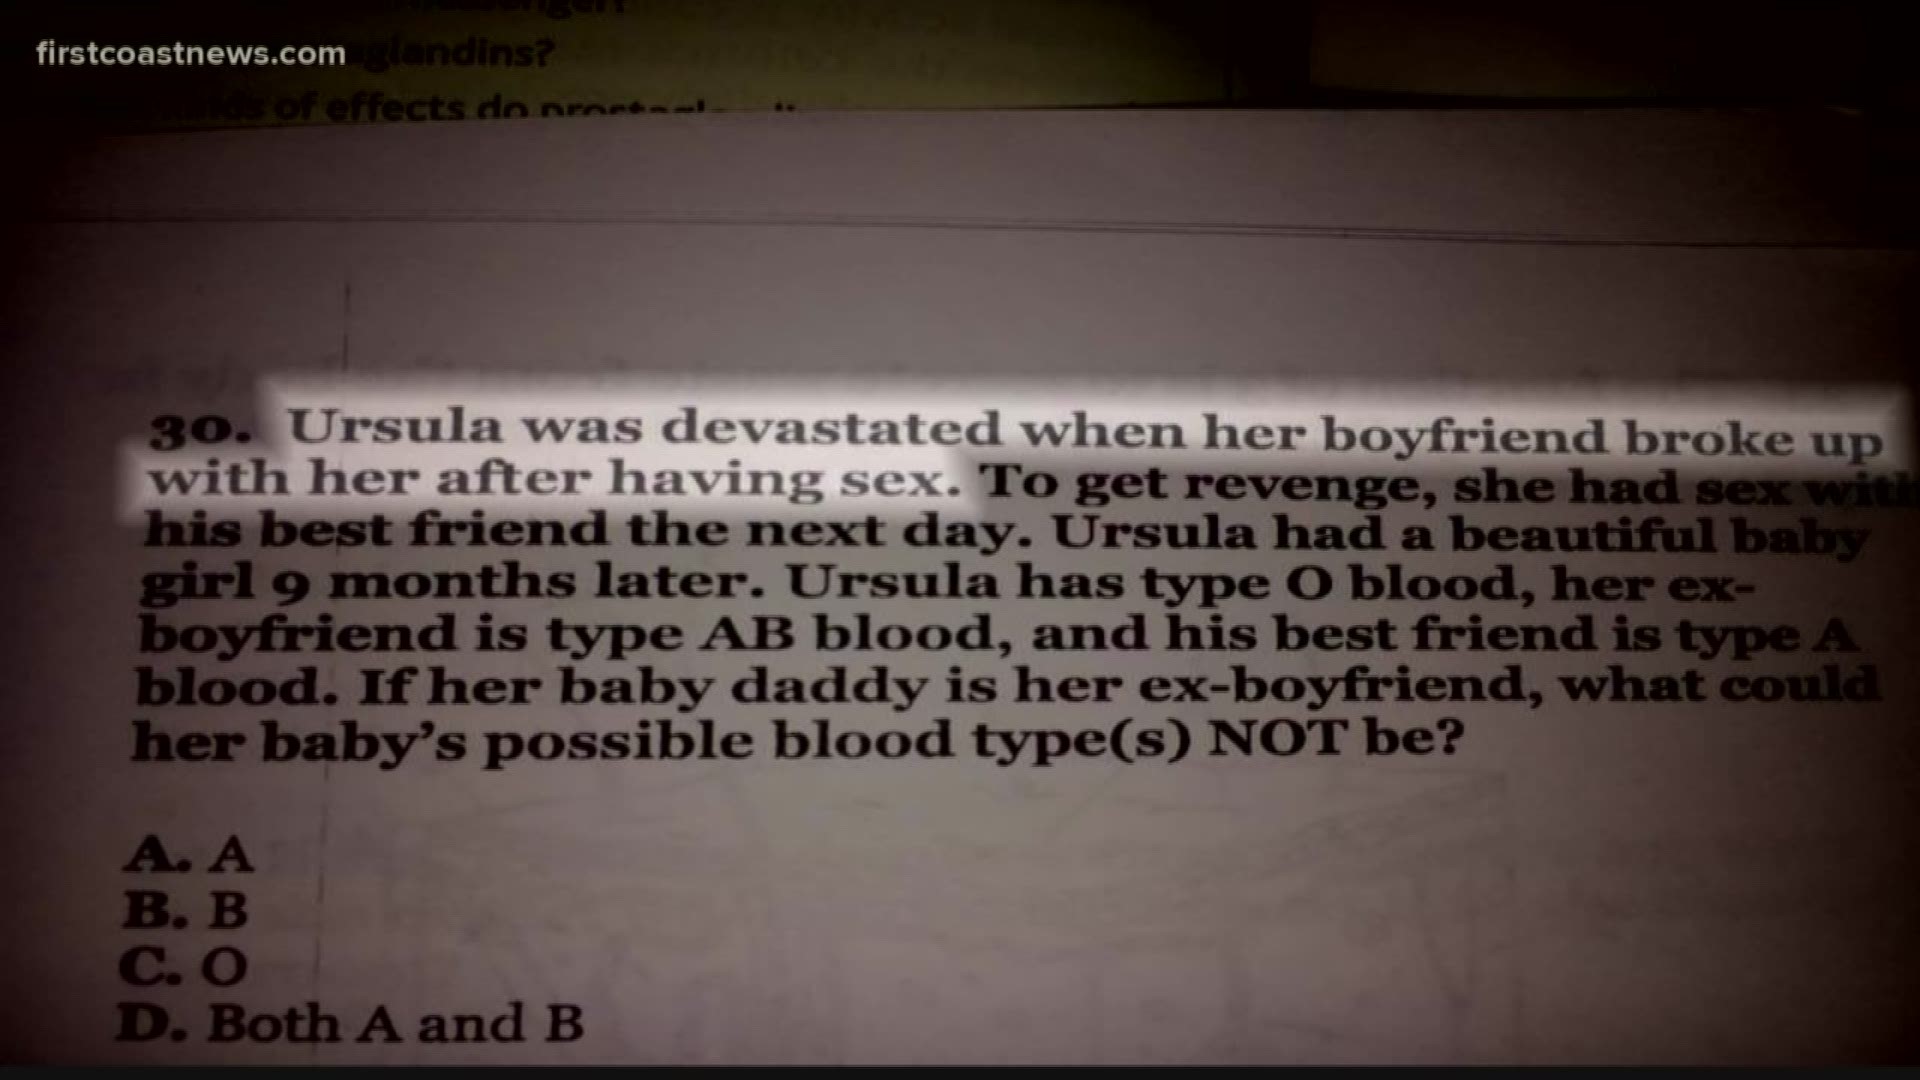 Father furious over daughters homework question about baby daddies, revenge sex 11alive image